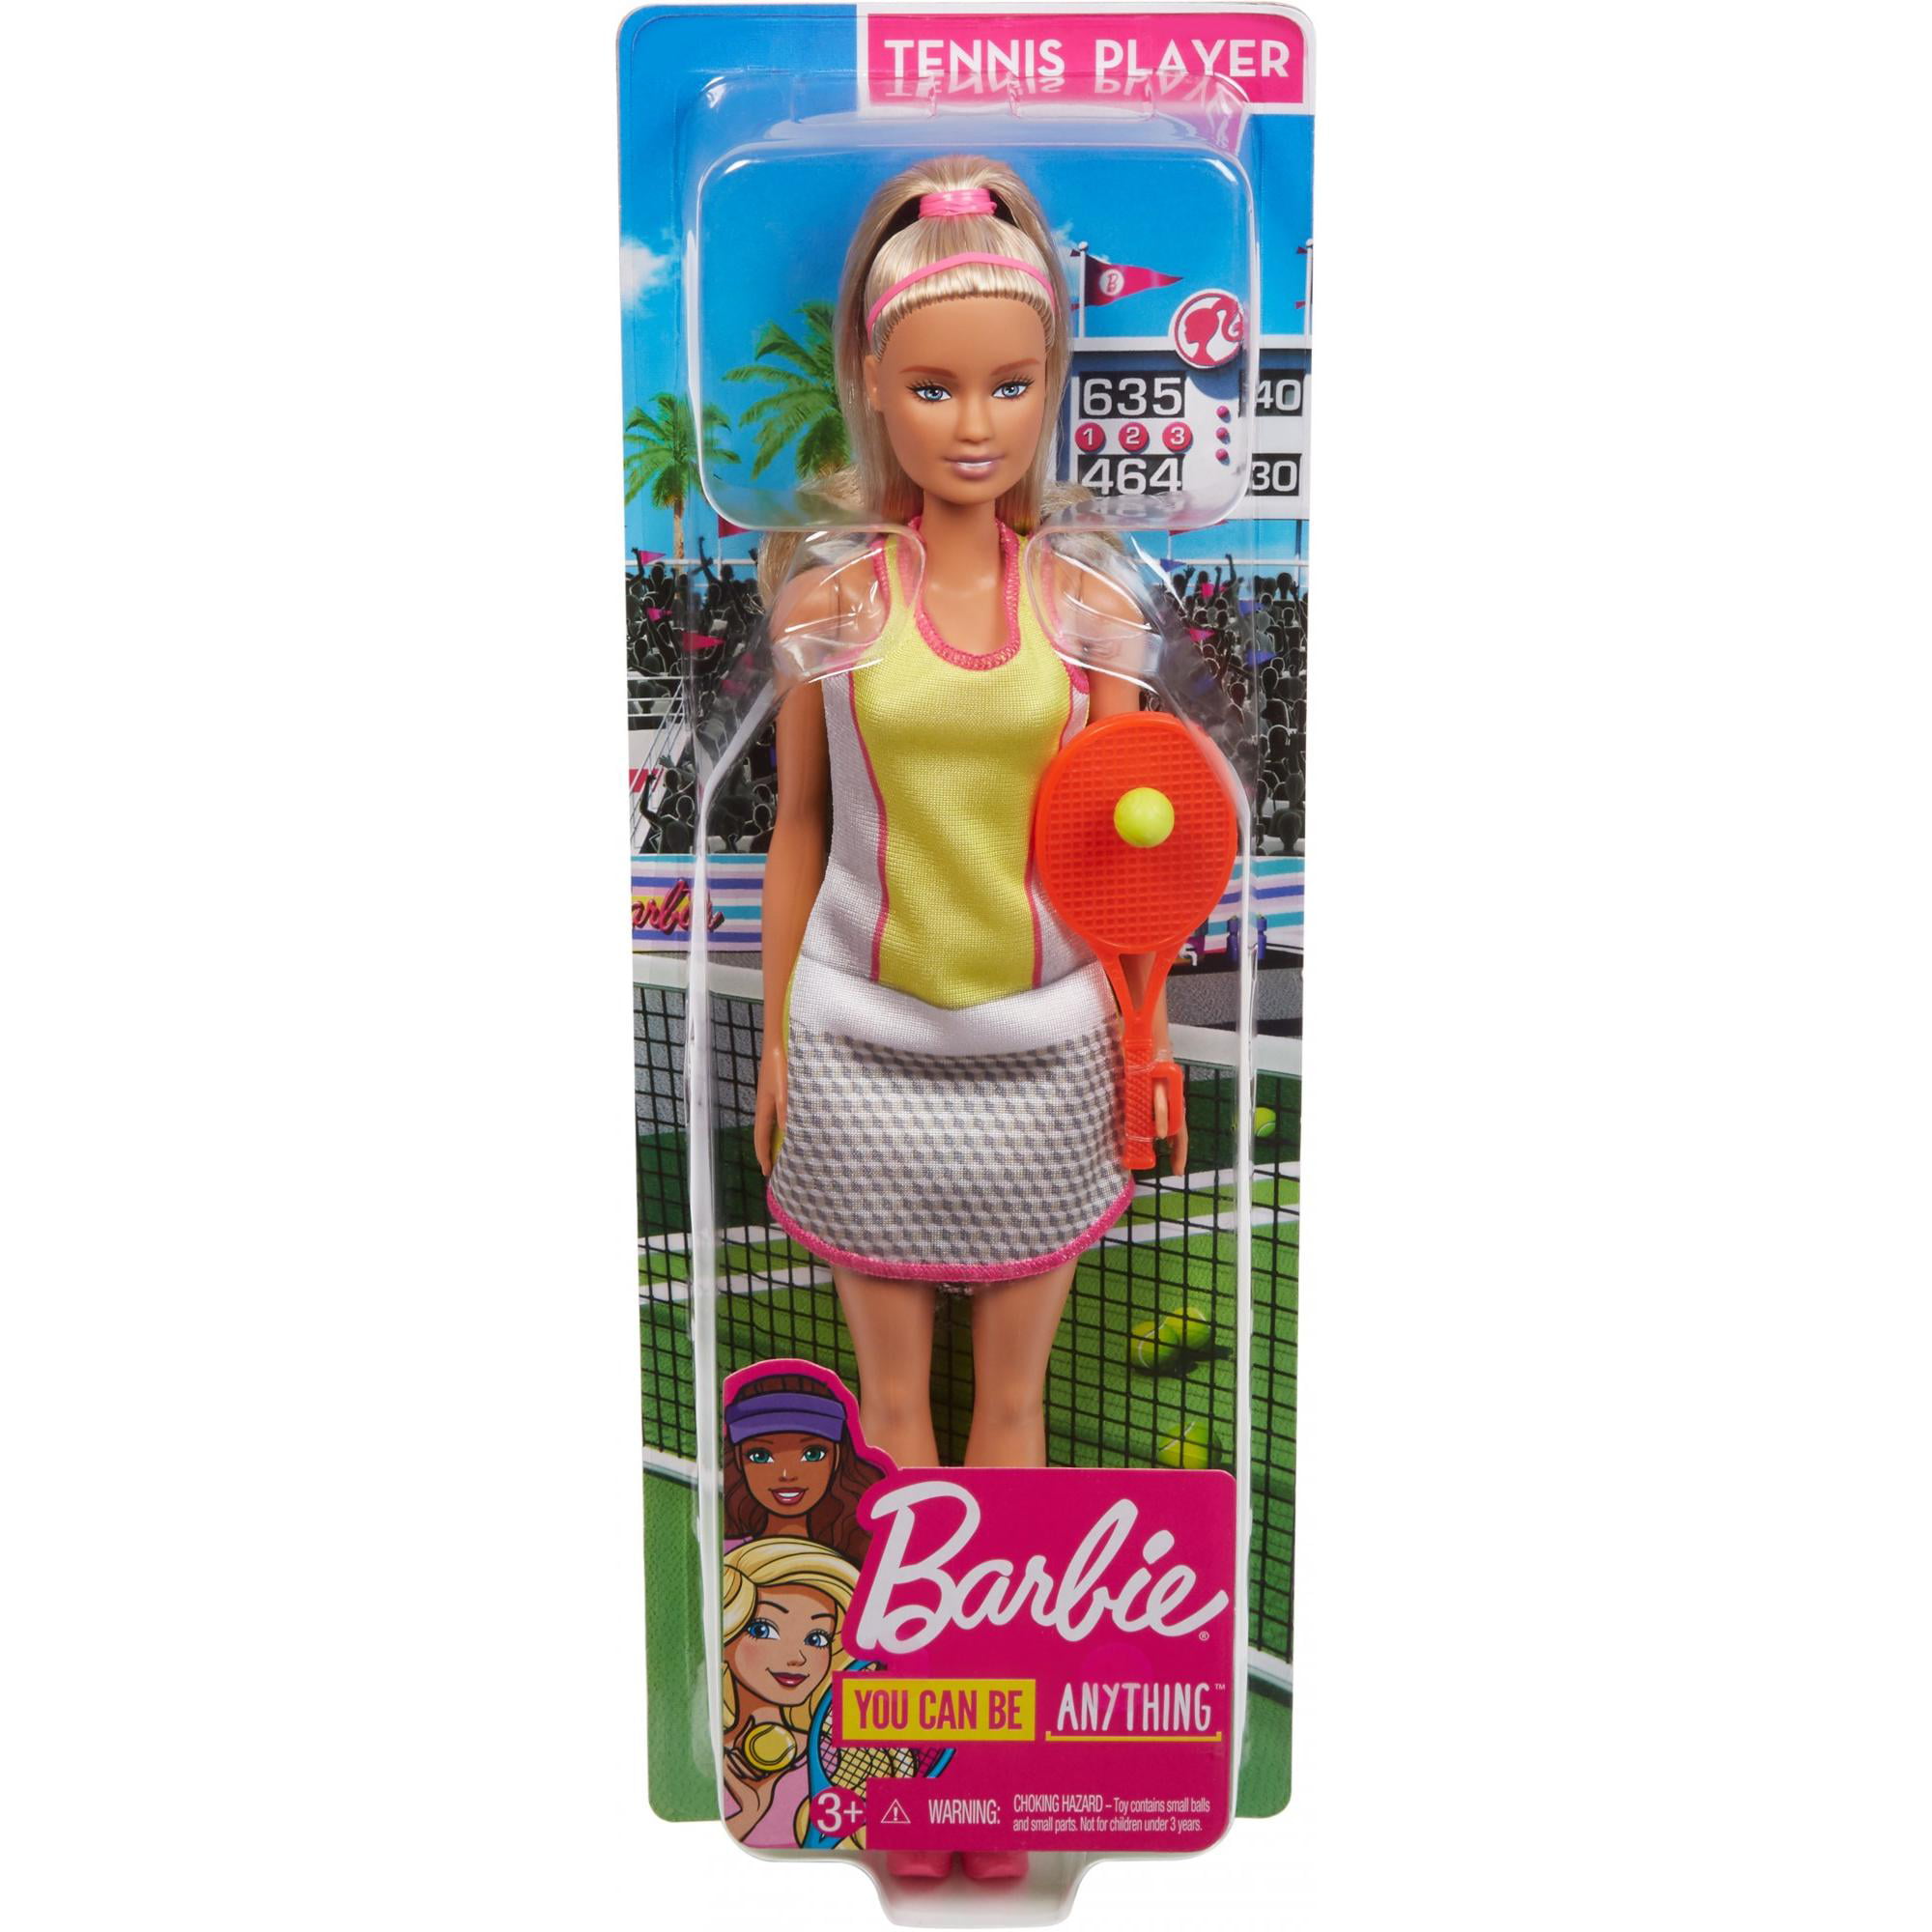 Subjektiv lade som om absolutte Barbie Blonde Tennis Player Doll With Tennis Outfit, Racket And Ball -  Walmart.com